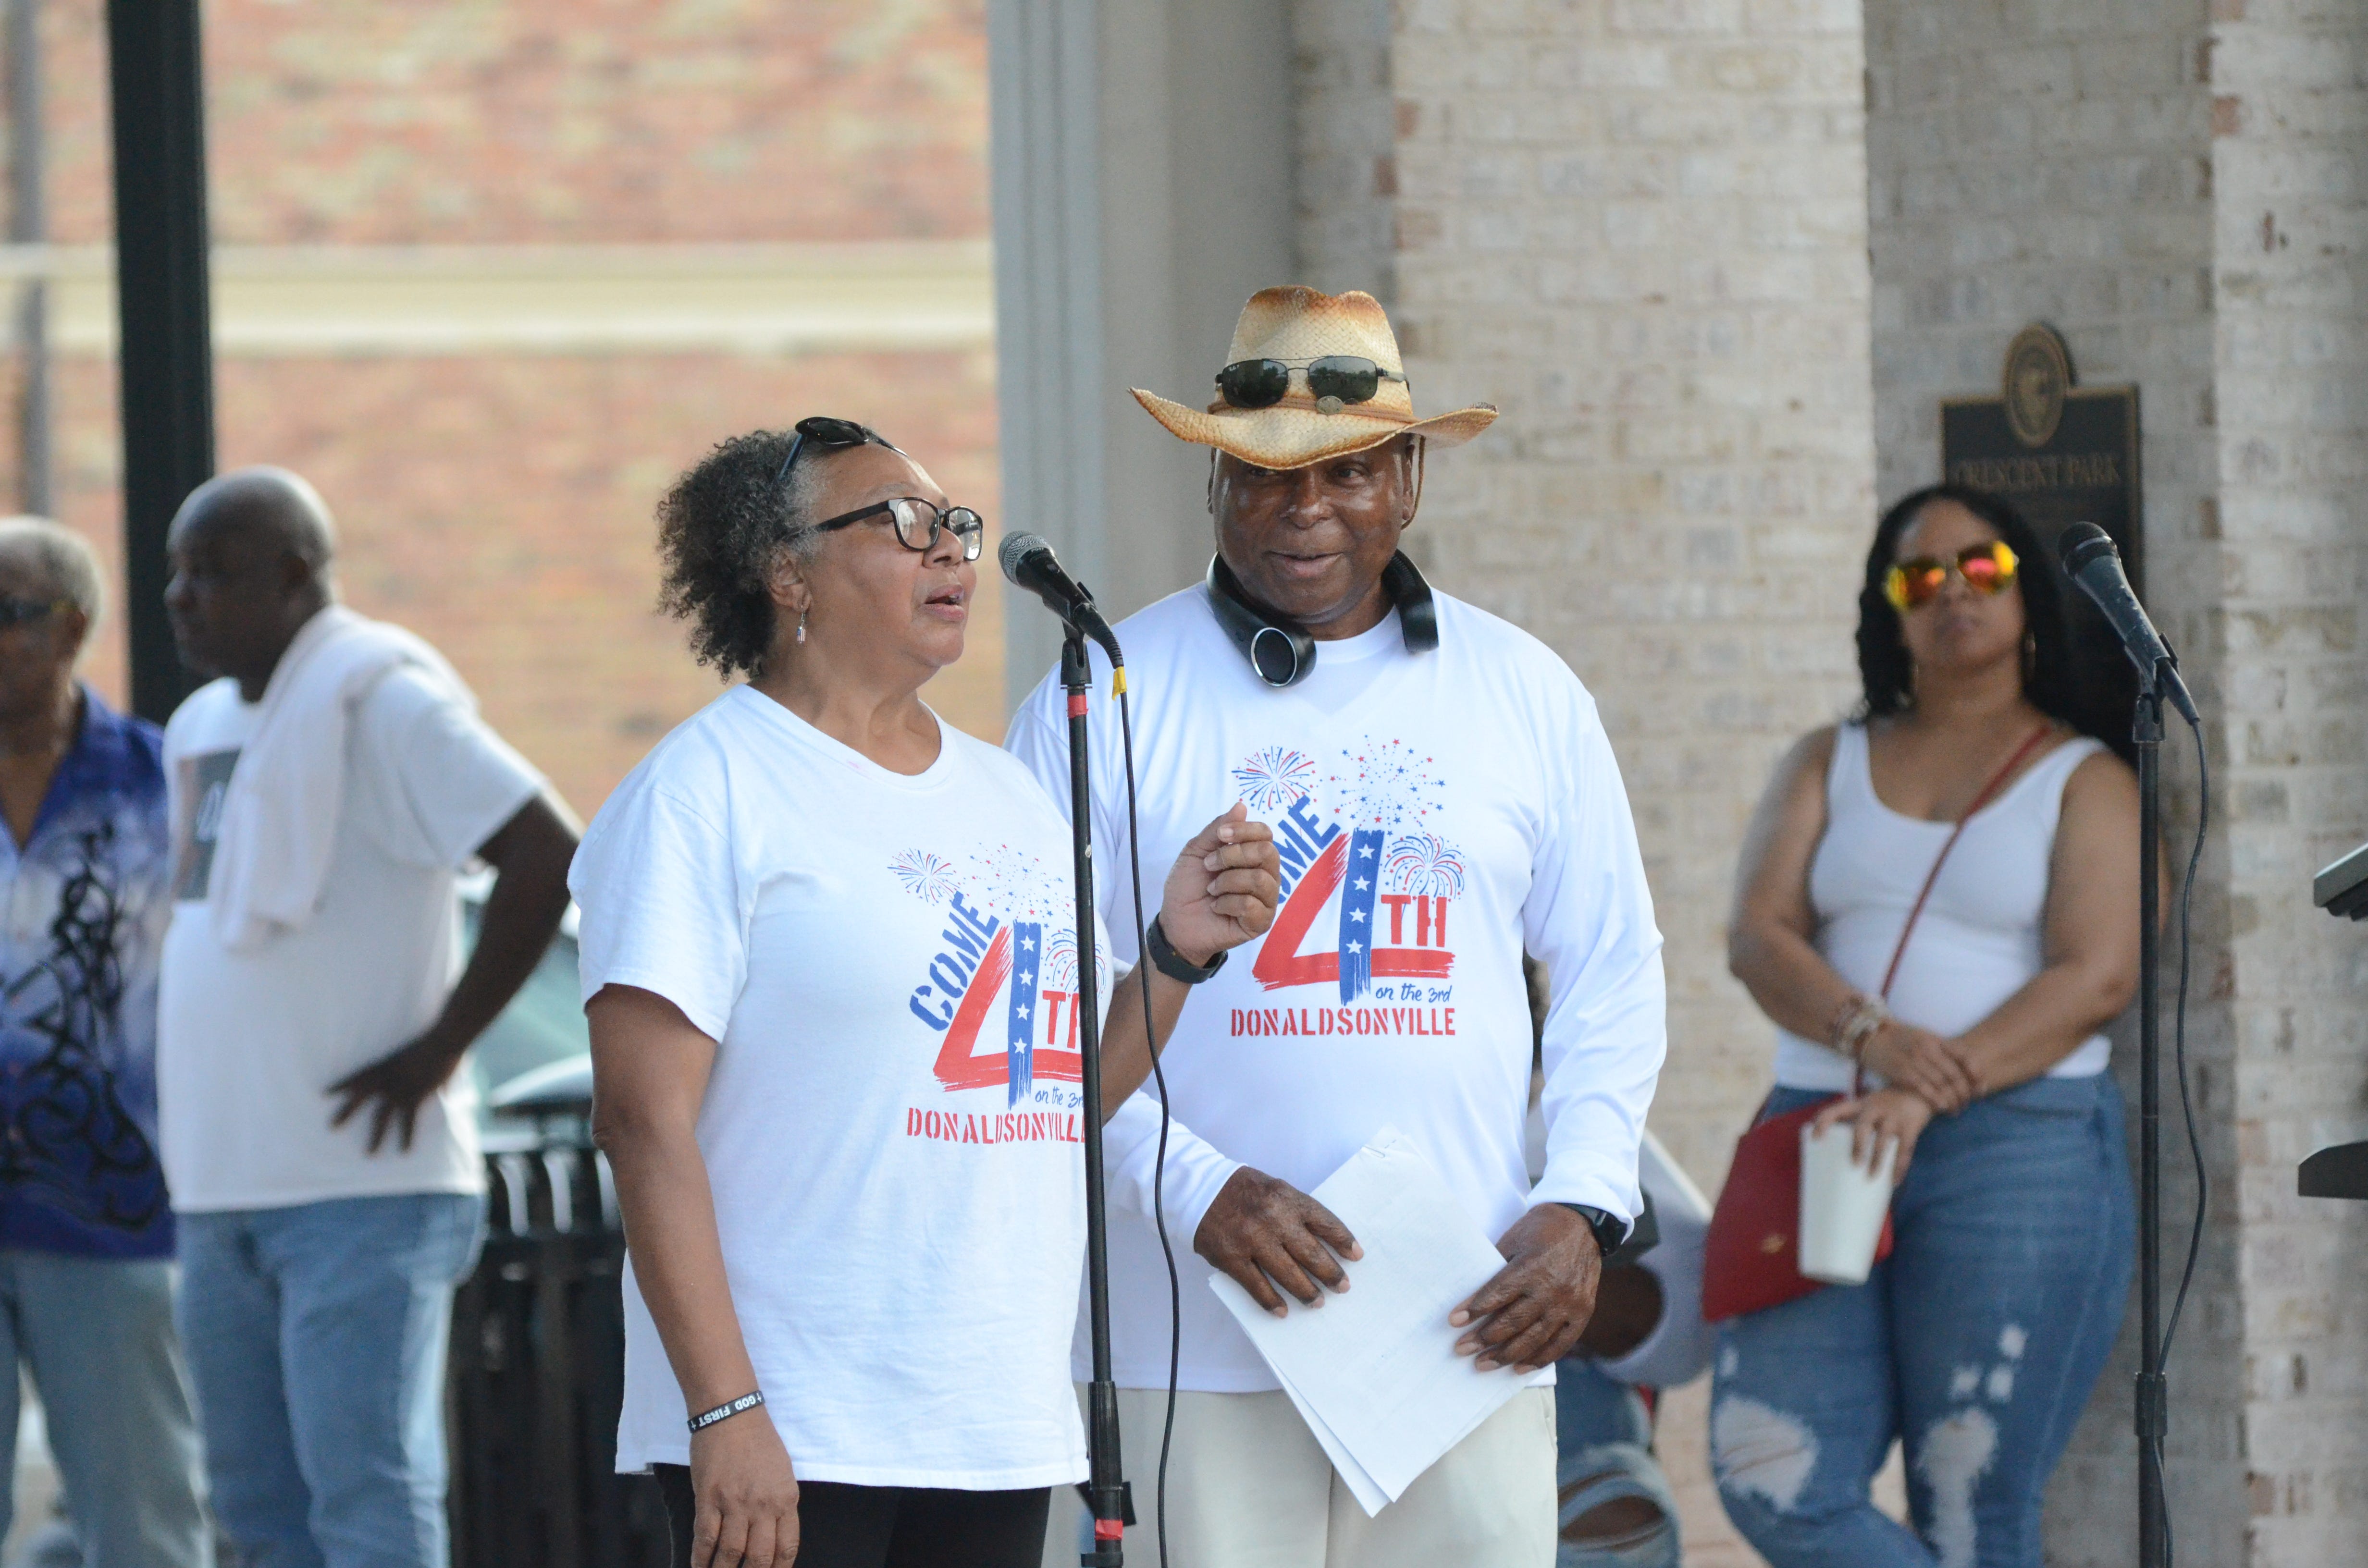 Donaldsonville Area Chamber of Commerce Executive Director Juanita Pearley and Donaldsonville Mayor Leroy Sullivan welcome everyone to the 2023 Donaldsonville Independence Day celebration held July 3 at Crescent Park.